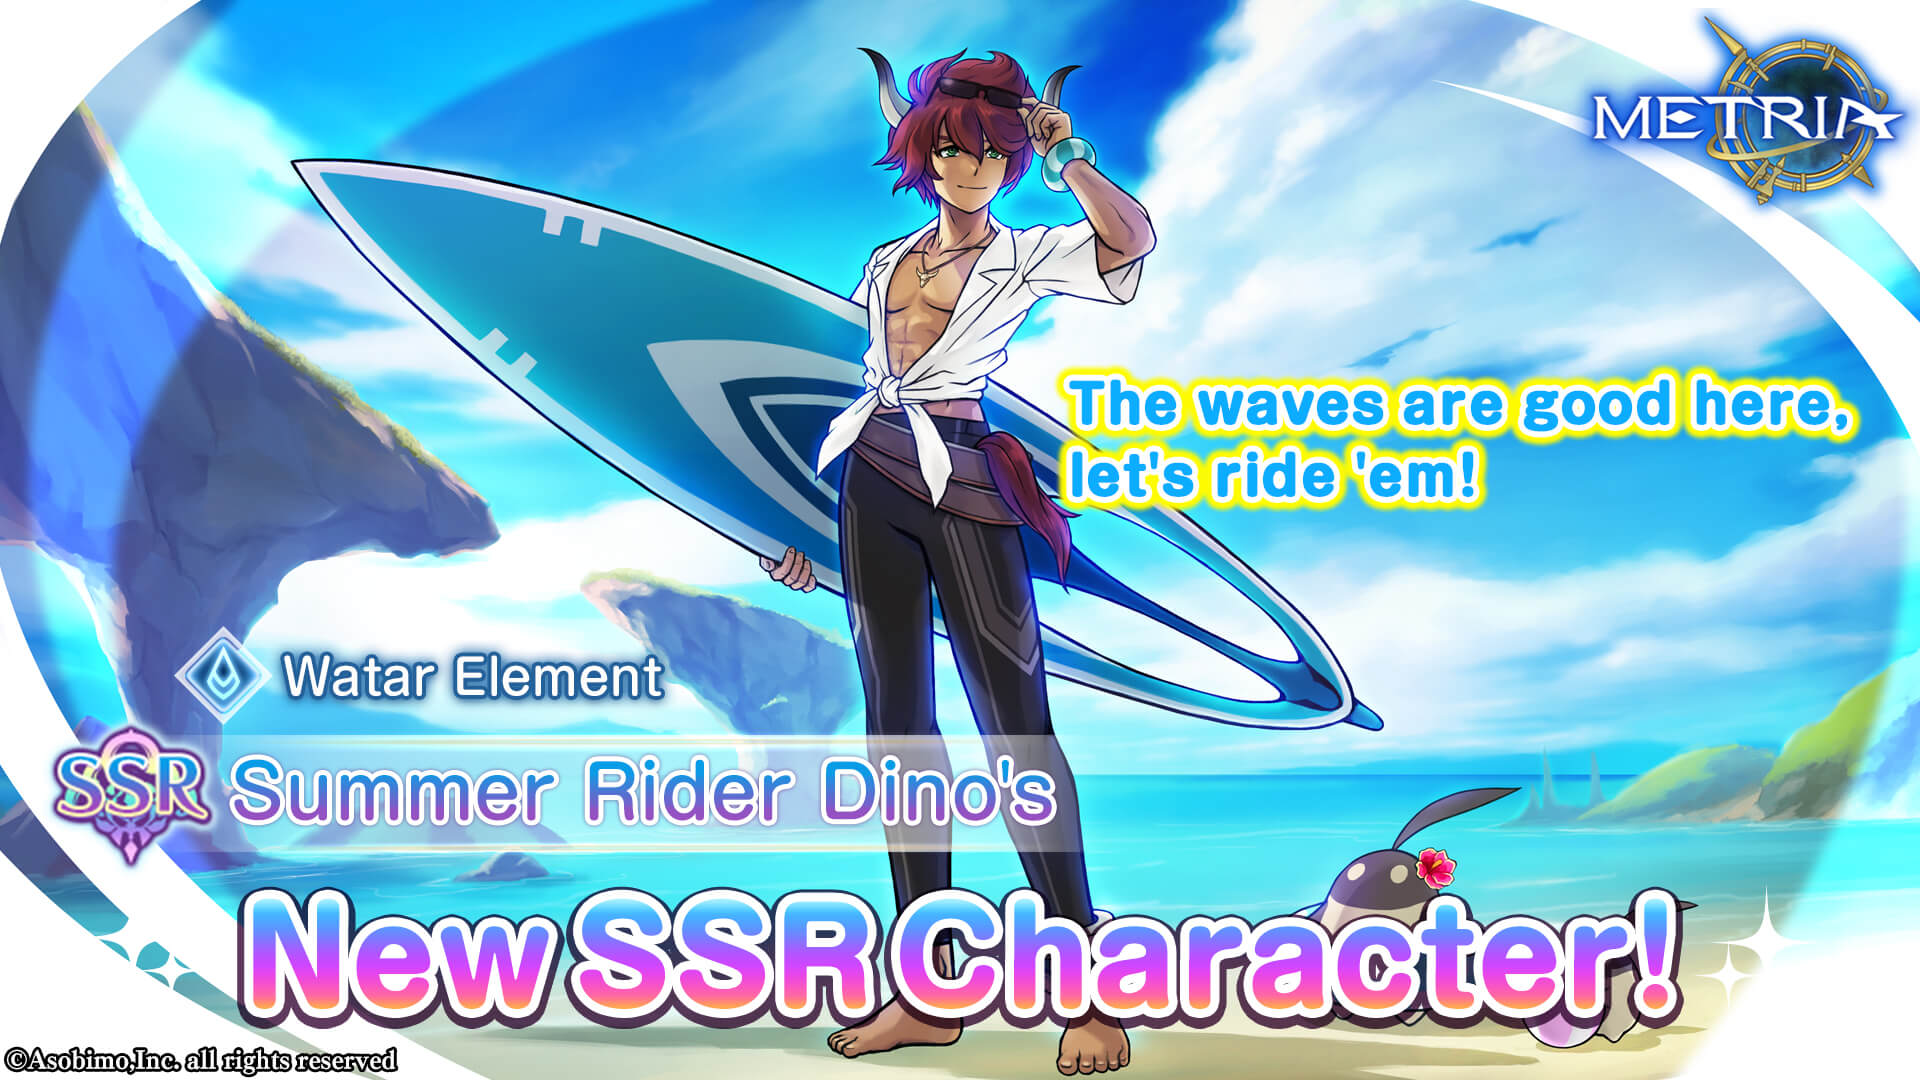 Water Element! New SSR Character: "Summer Rider Dino's" Available for Purchase!